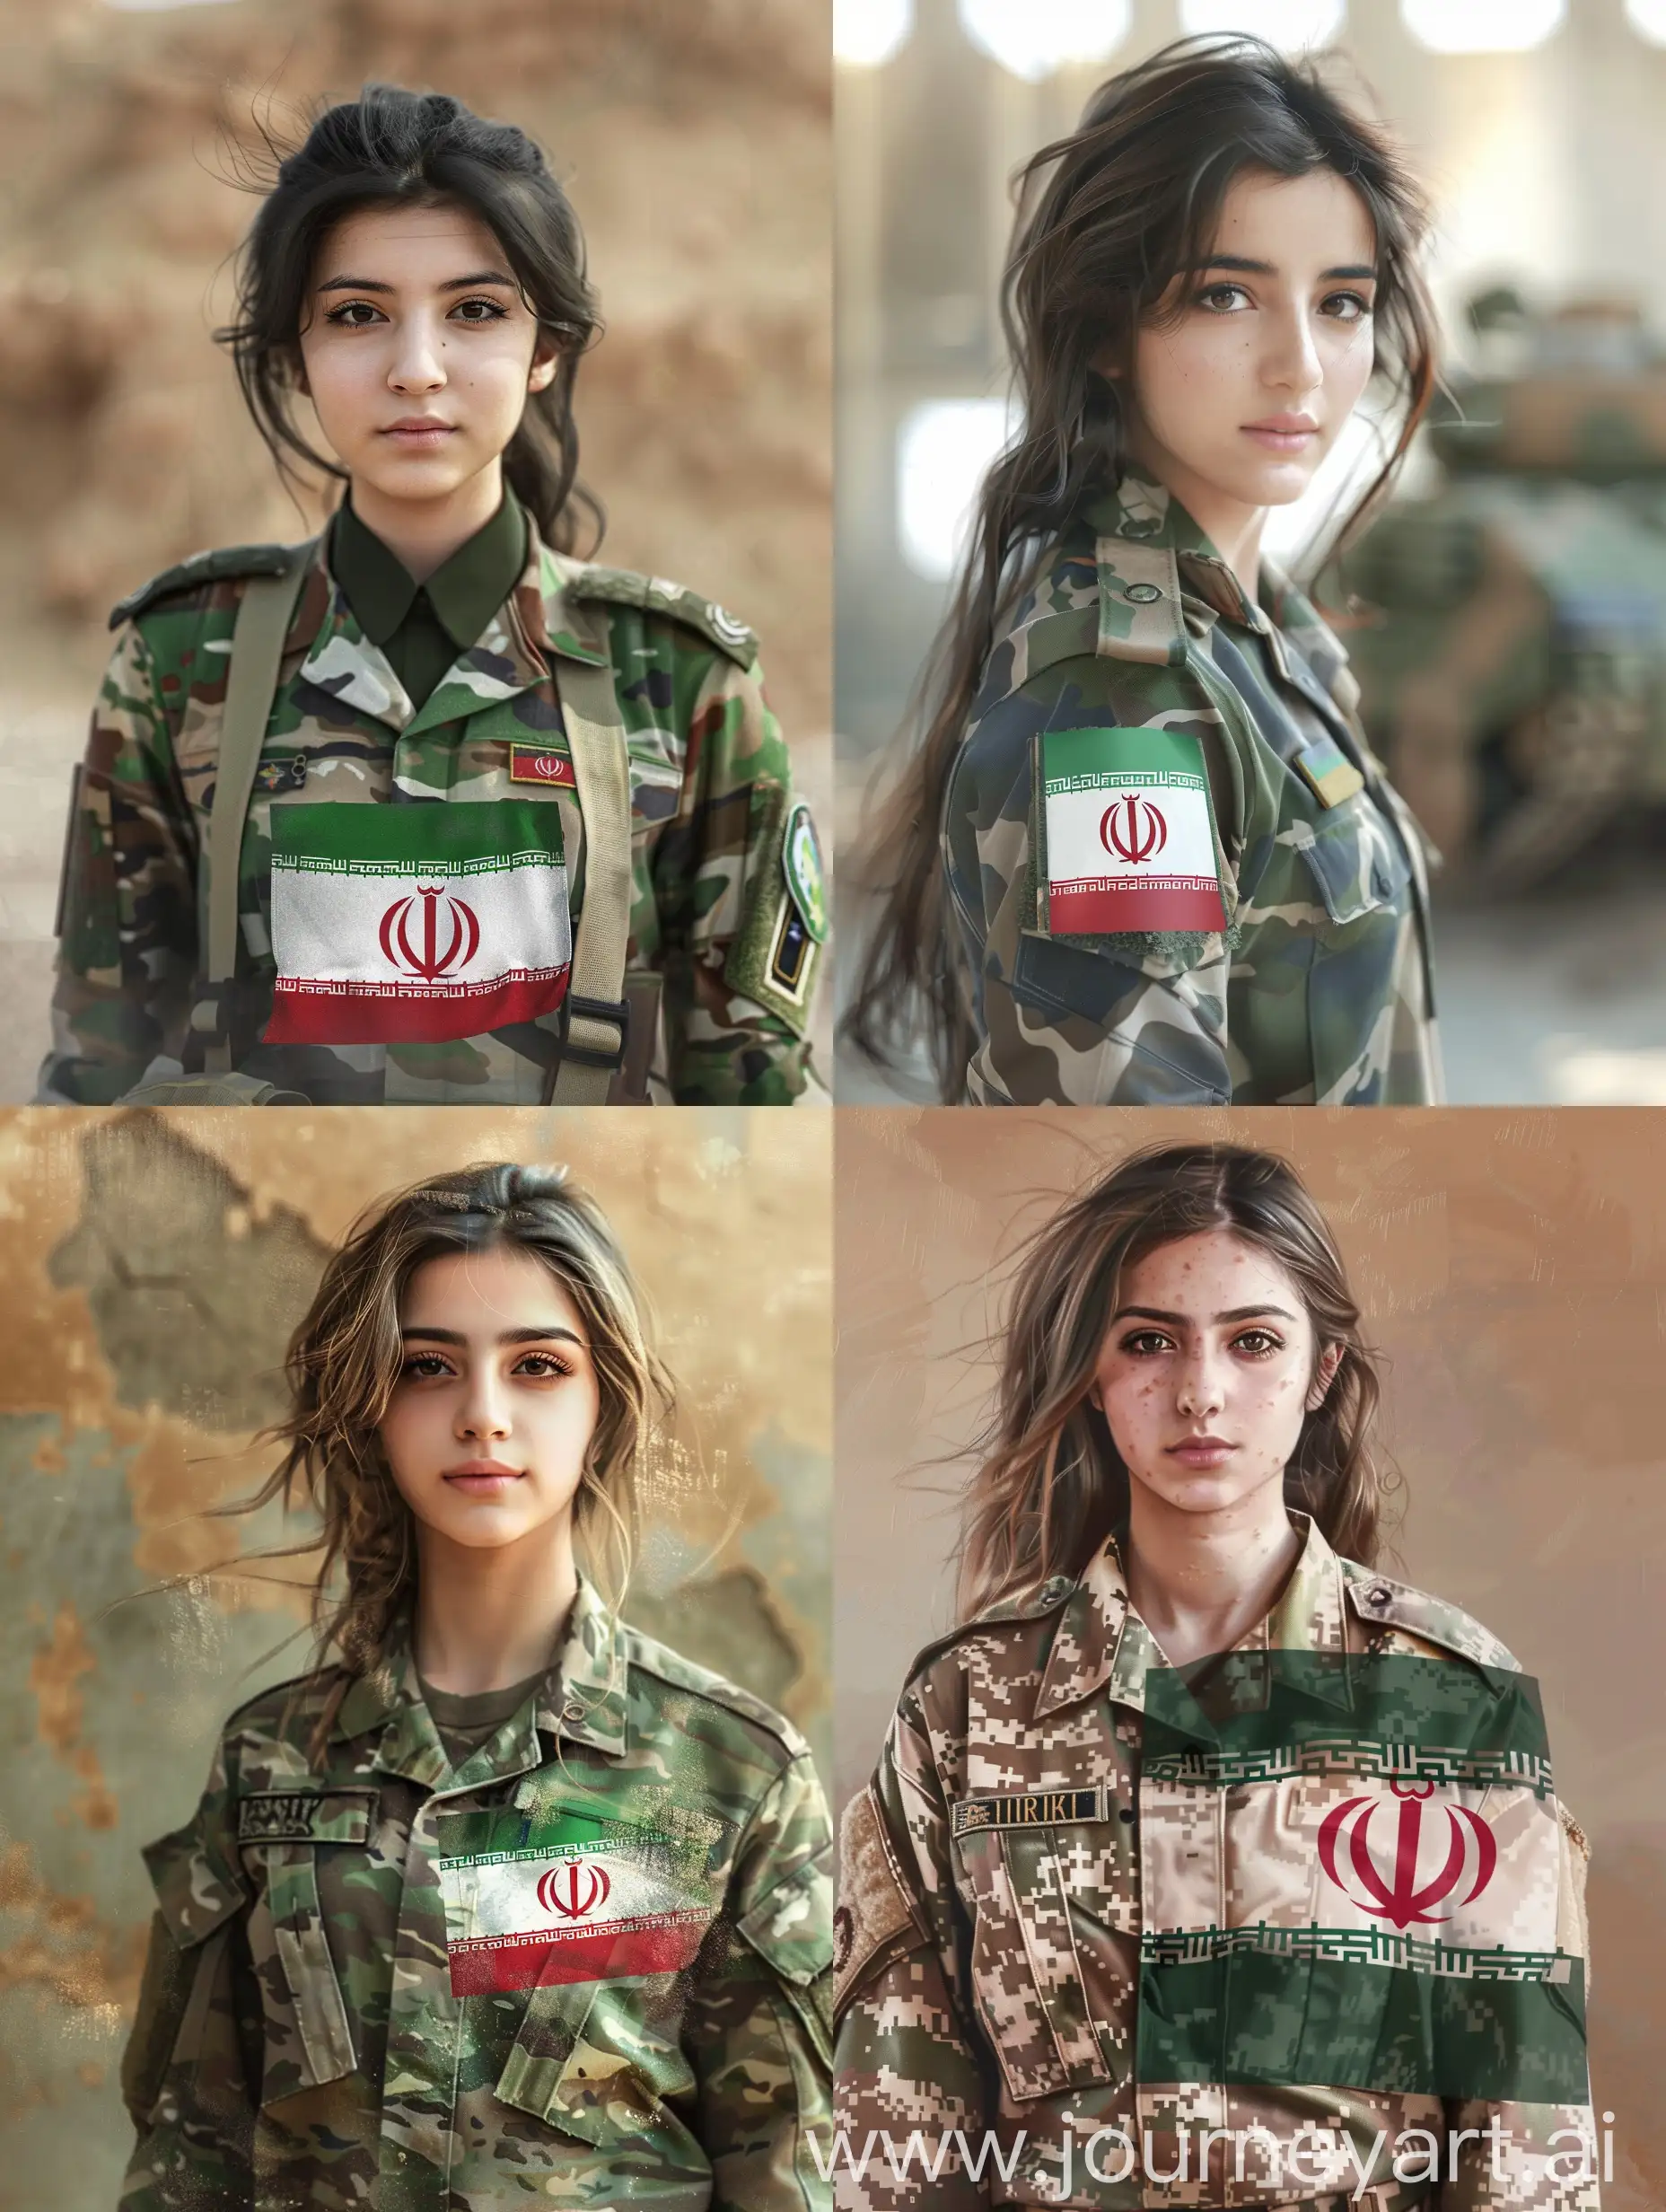 Patriotic-Iranian-Girl-in-Military-Uniform-with-National-Flag